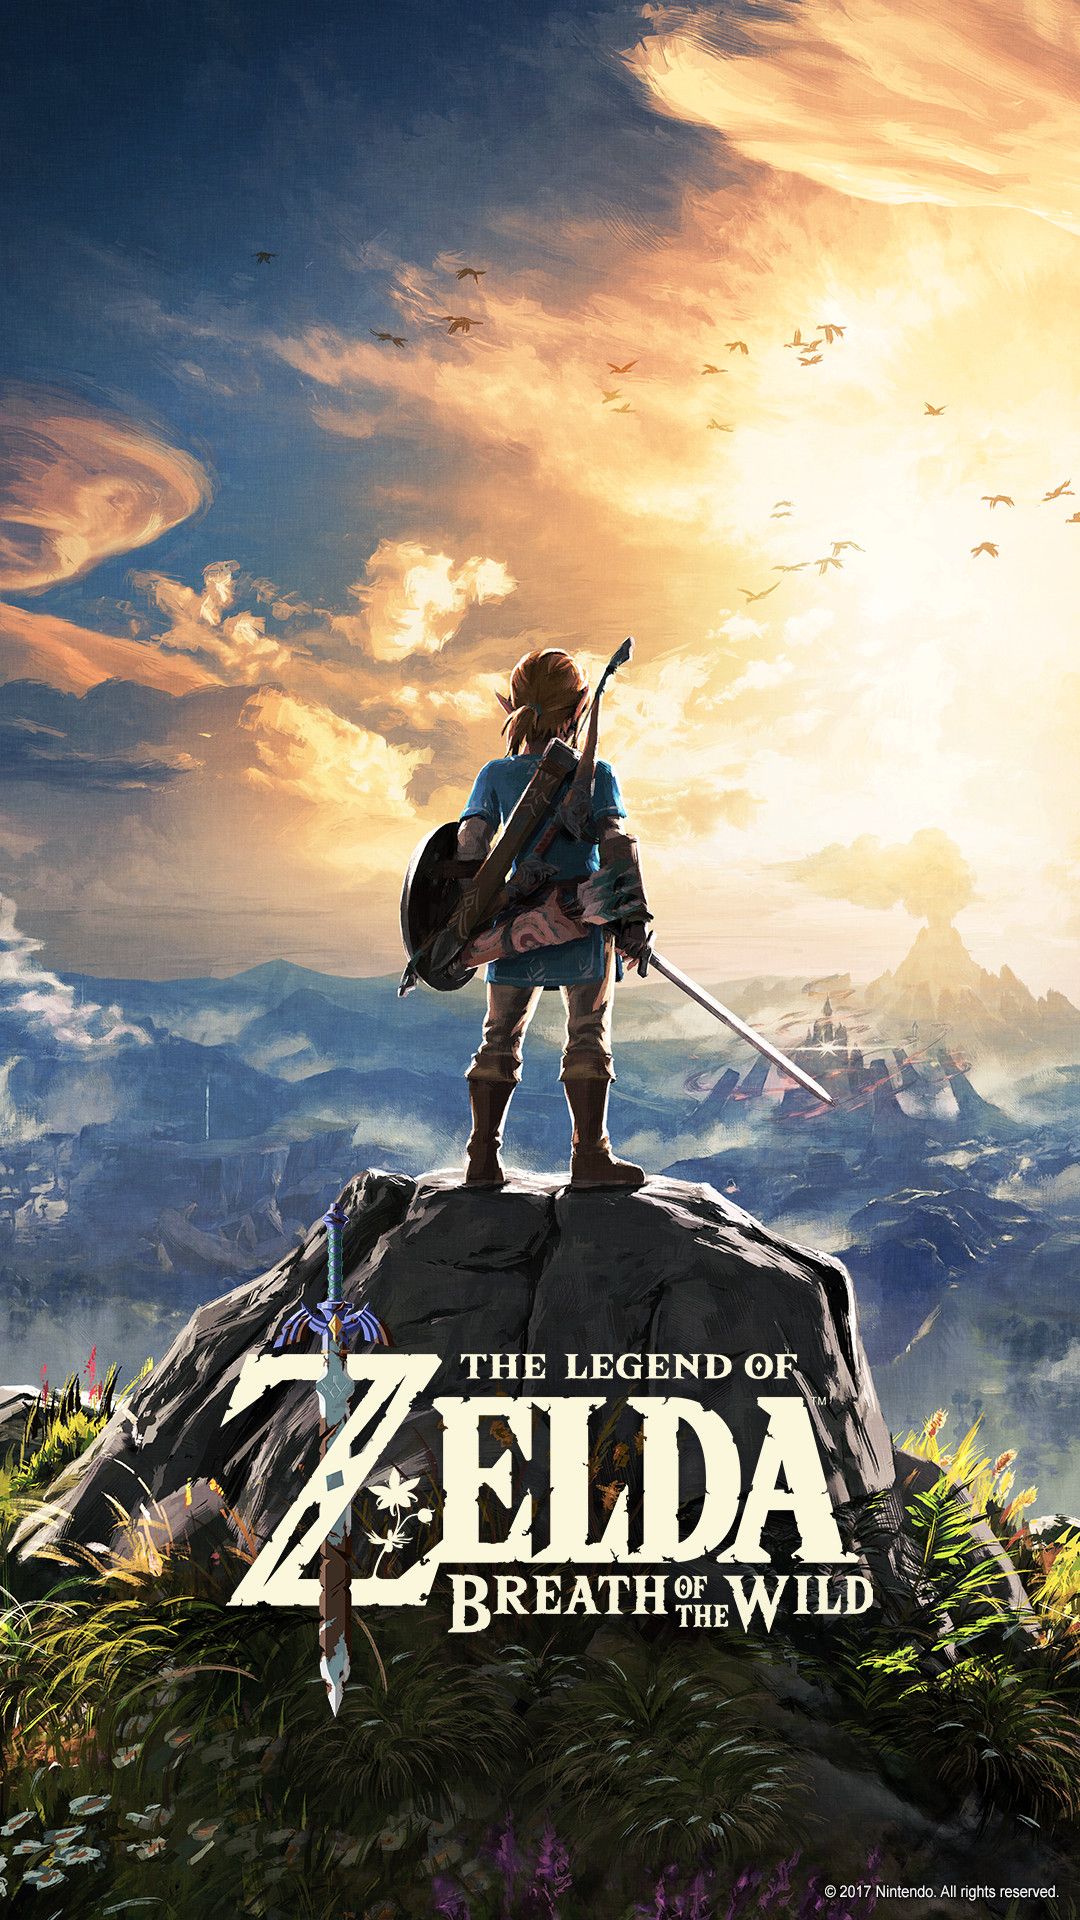 1080x1920 The Legend Of Zelda Breath Of The Wild For The Nintendo Switch Home Gaming System And Wii U Console